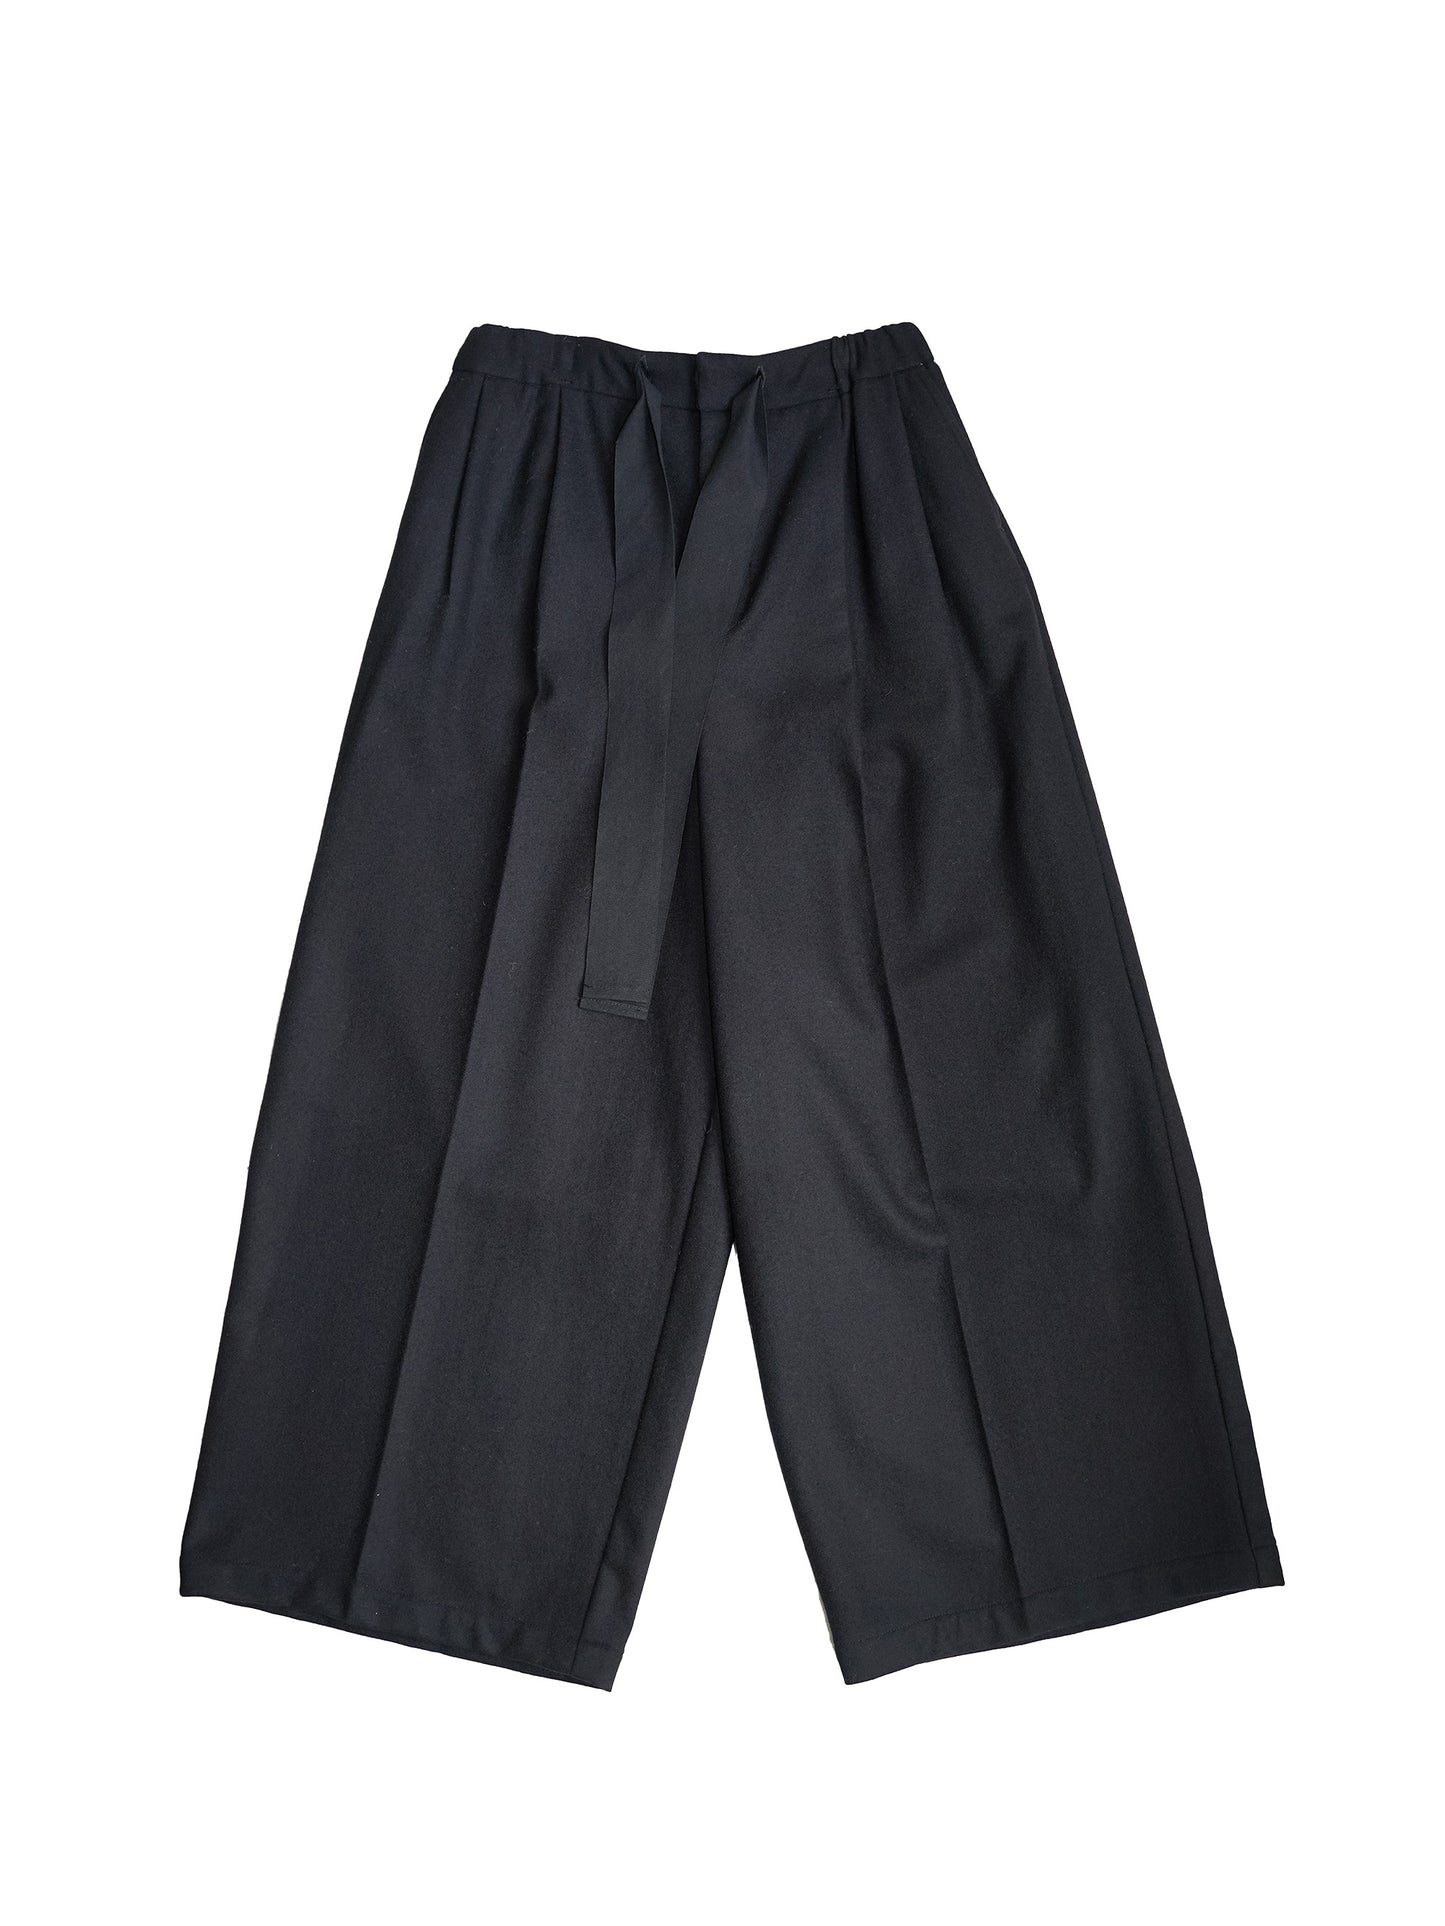 disemBySiiK Superwide Relux Wool Pants